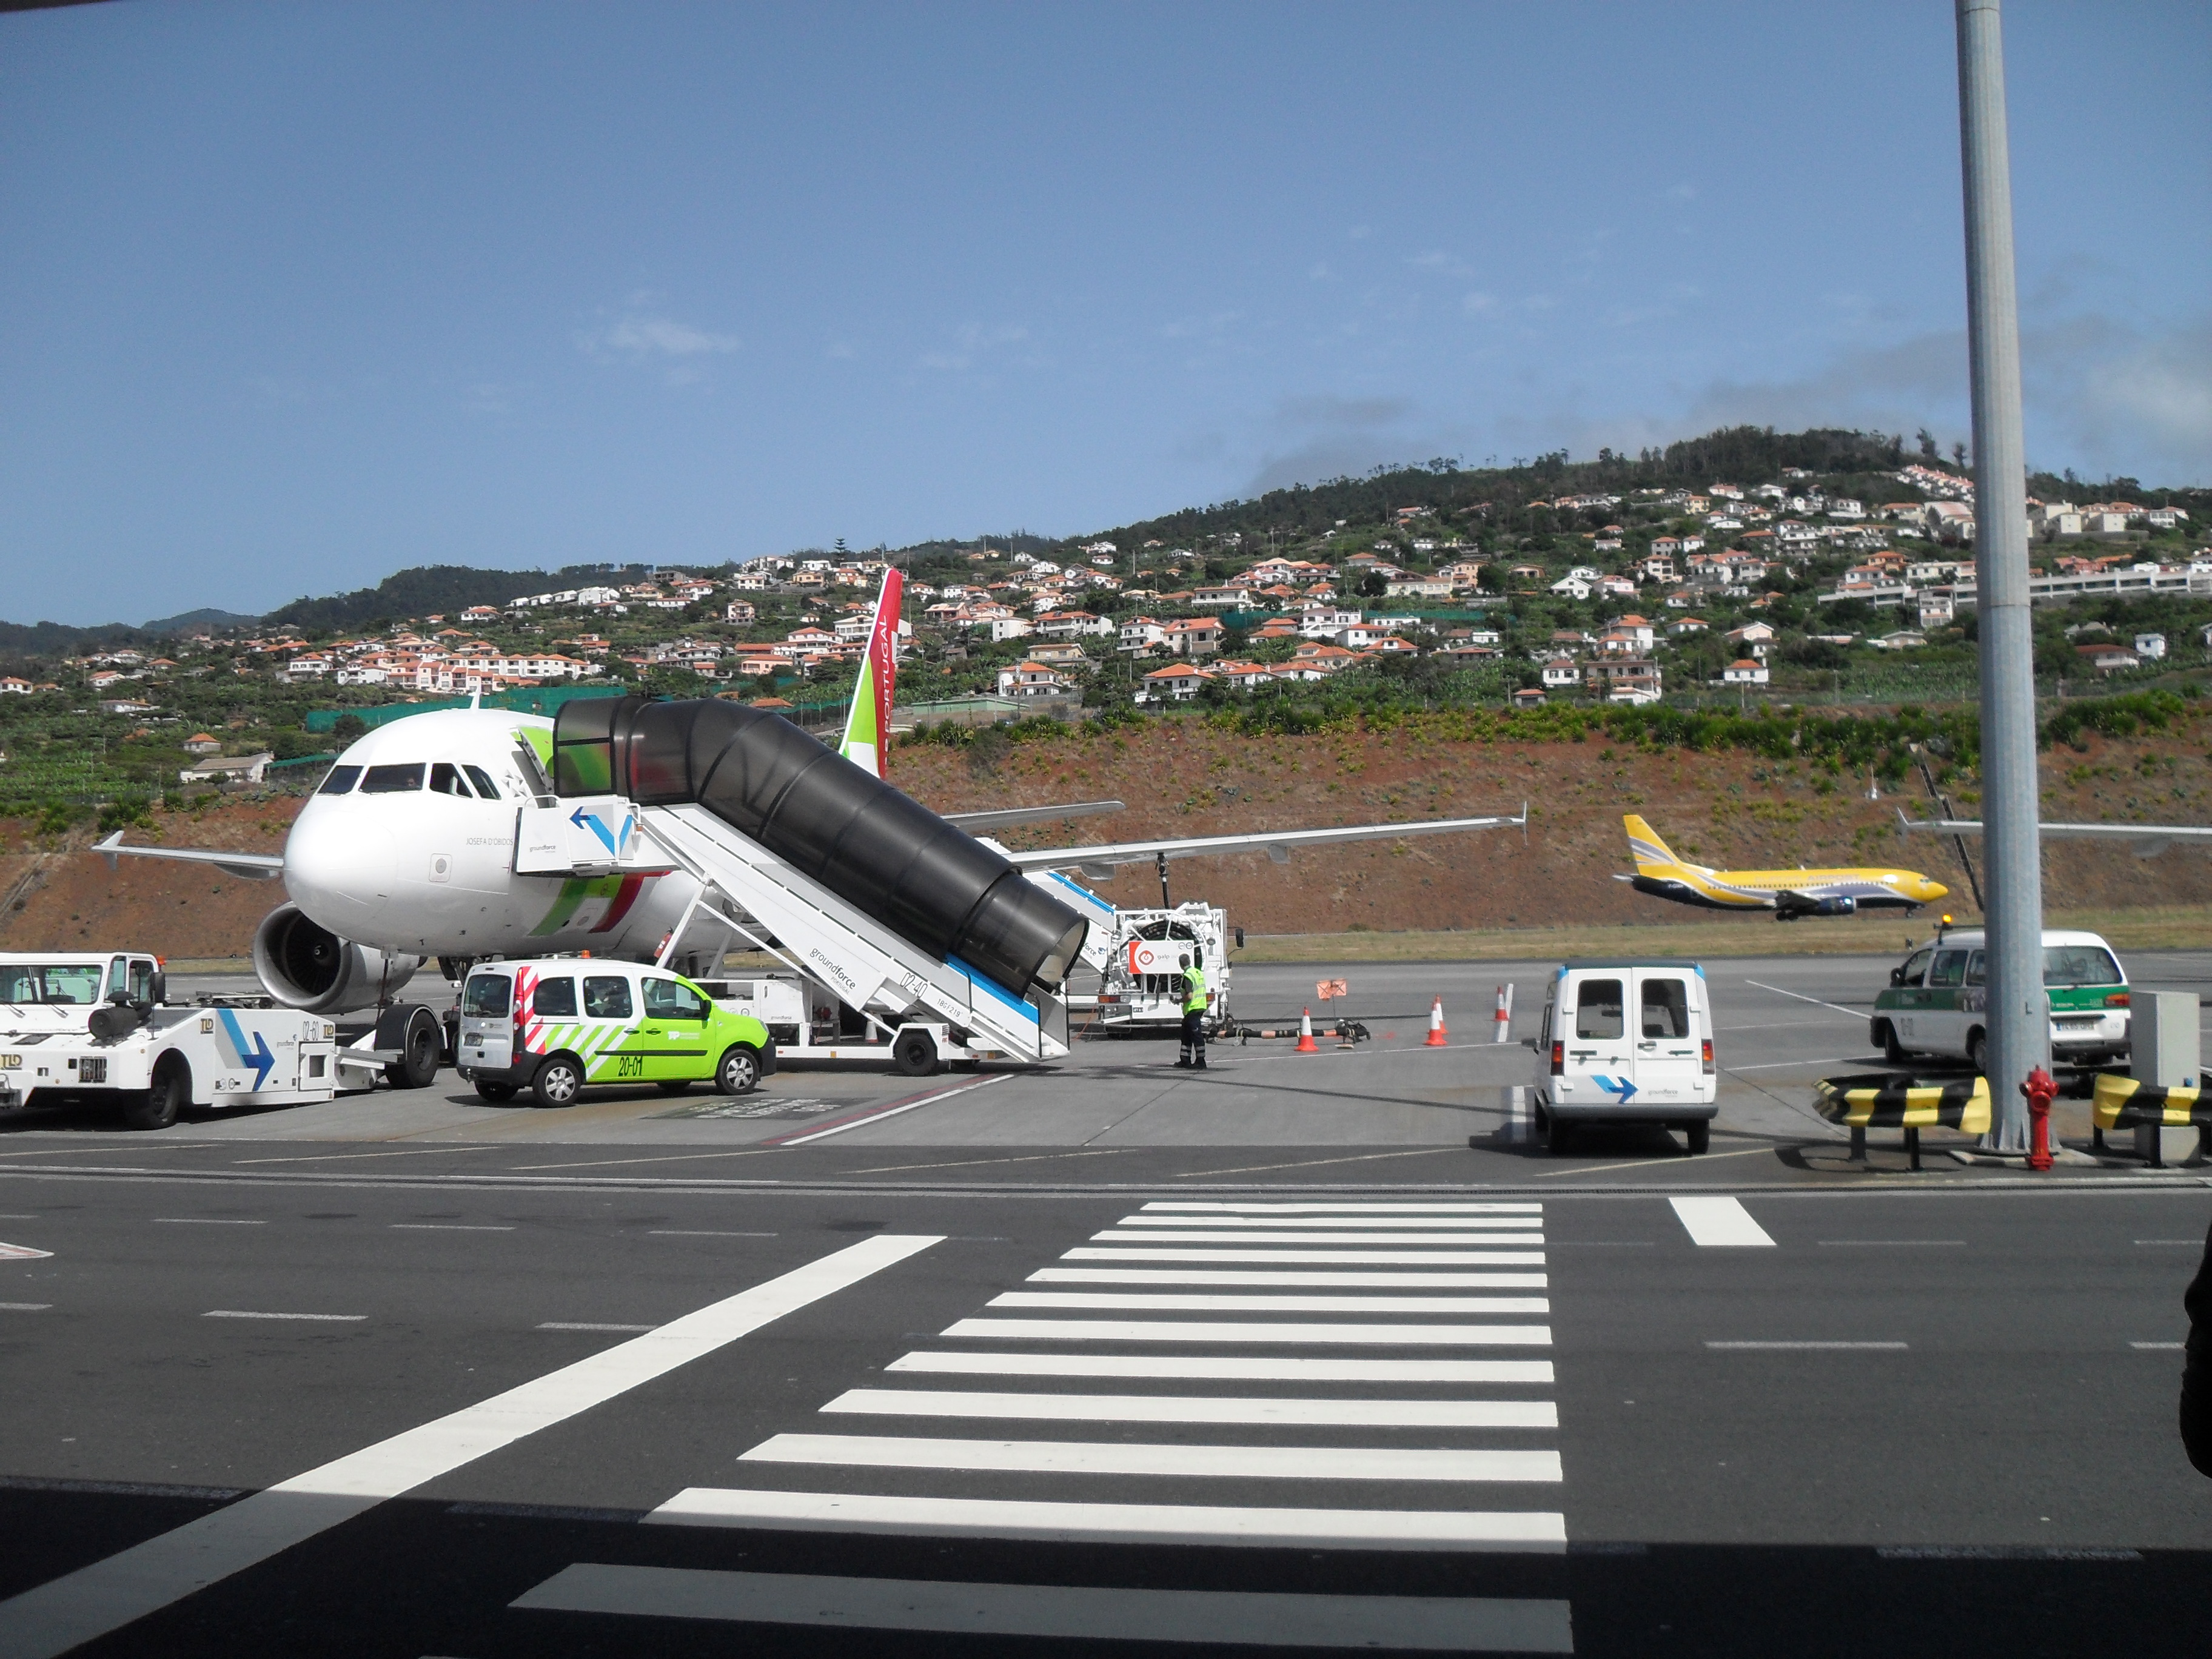 TAP_Portugal_A319_in_Funchal_Airport.jpg